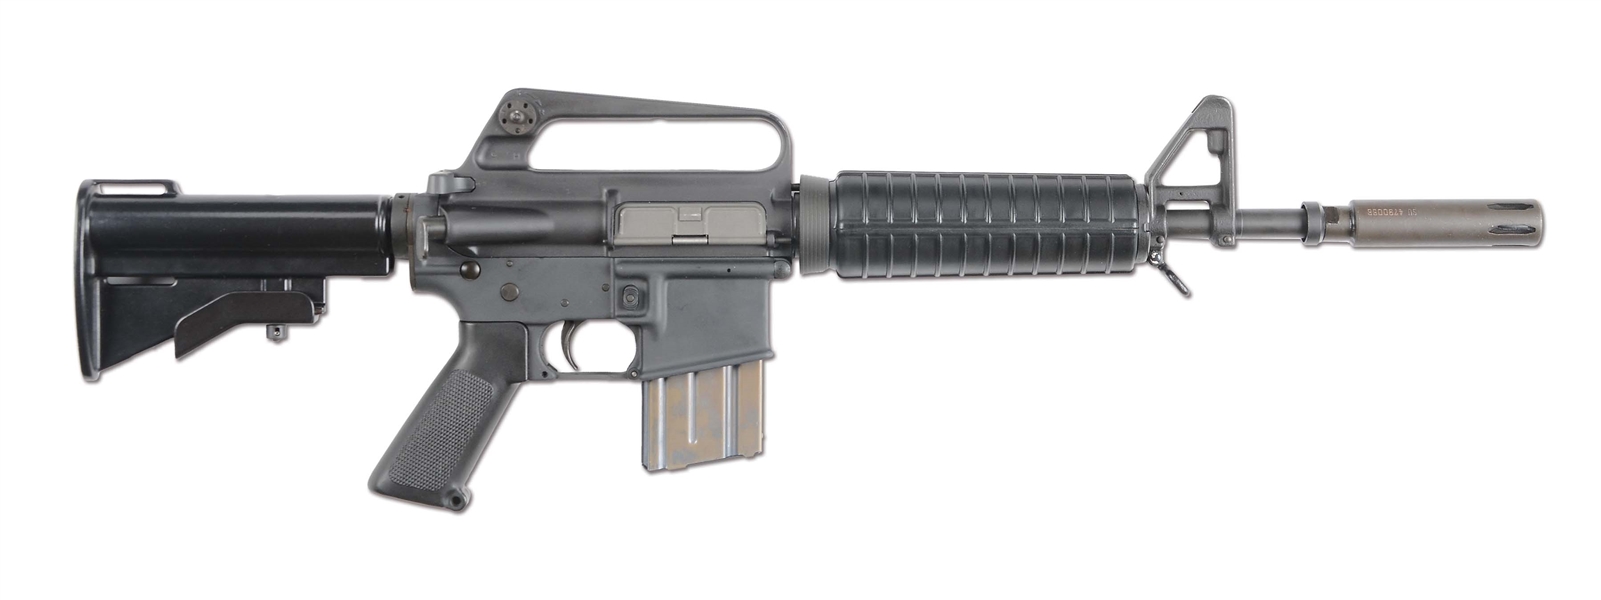 (N) EXTREMELY RARE AND SOUGHT AFTER COLT MODEL 639 CARBINE VARIANT OF THE M16 MACHINE GUN WITH MODERATOR (FULLY TRANSFERABLE)